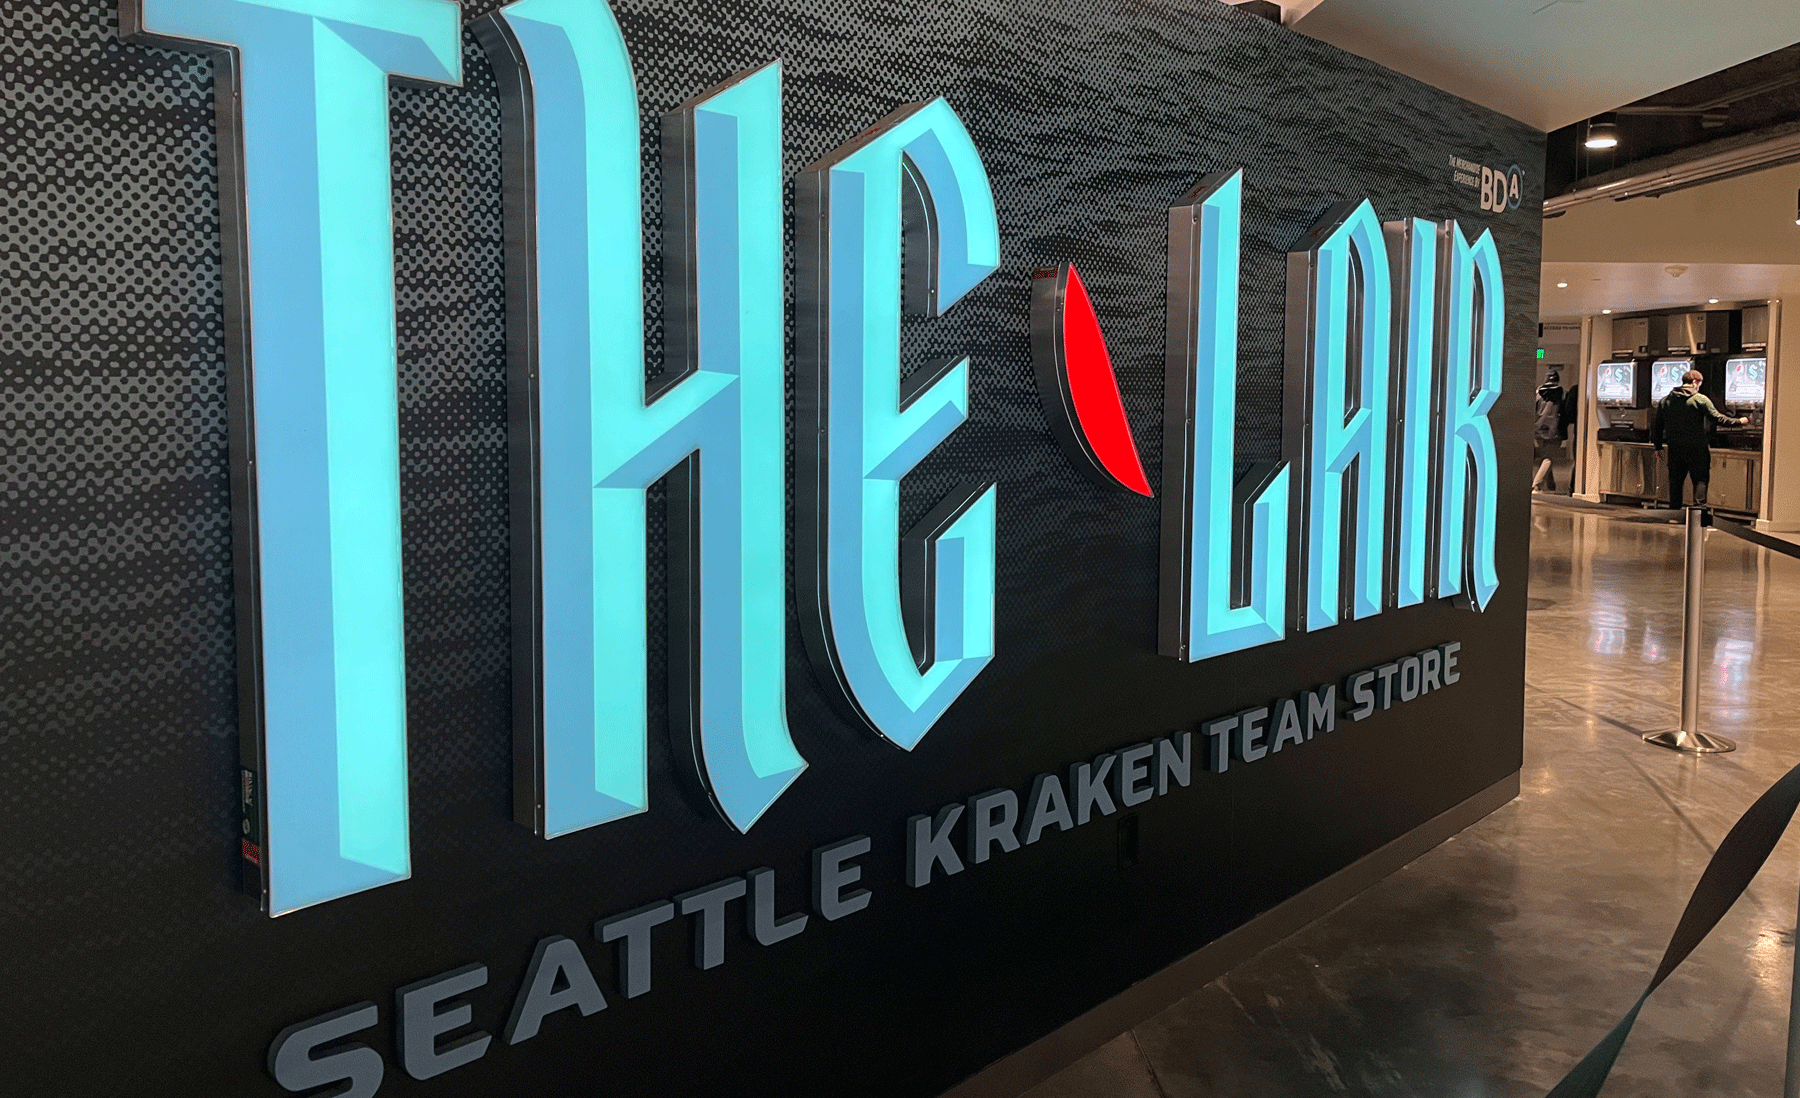 A sign that reads "The Lair, Seattle Kraken Team Store" at the Climate Pledge Arena in Seattle.